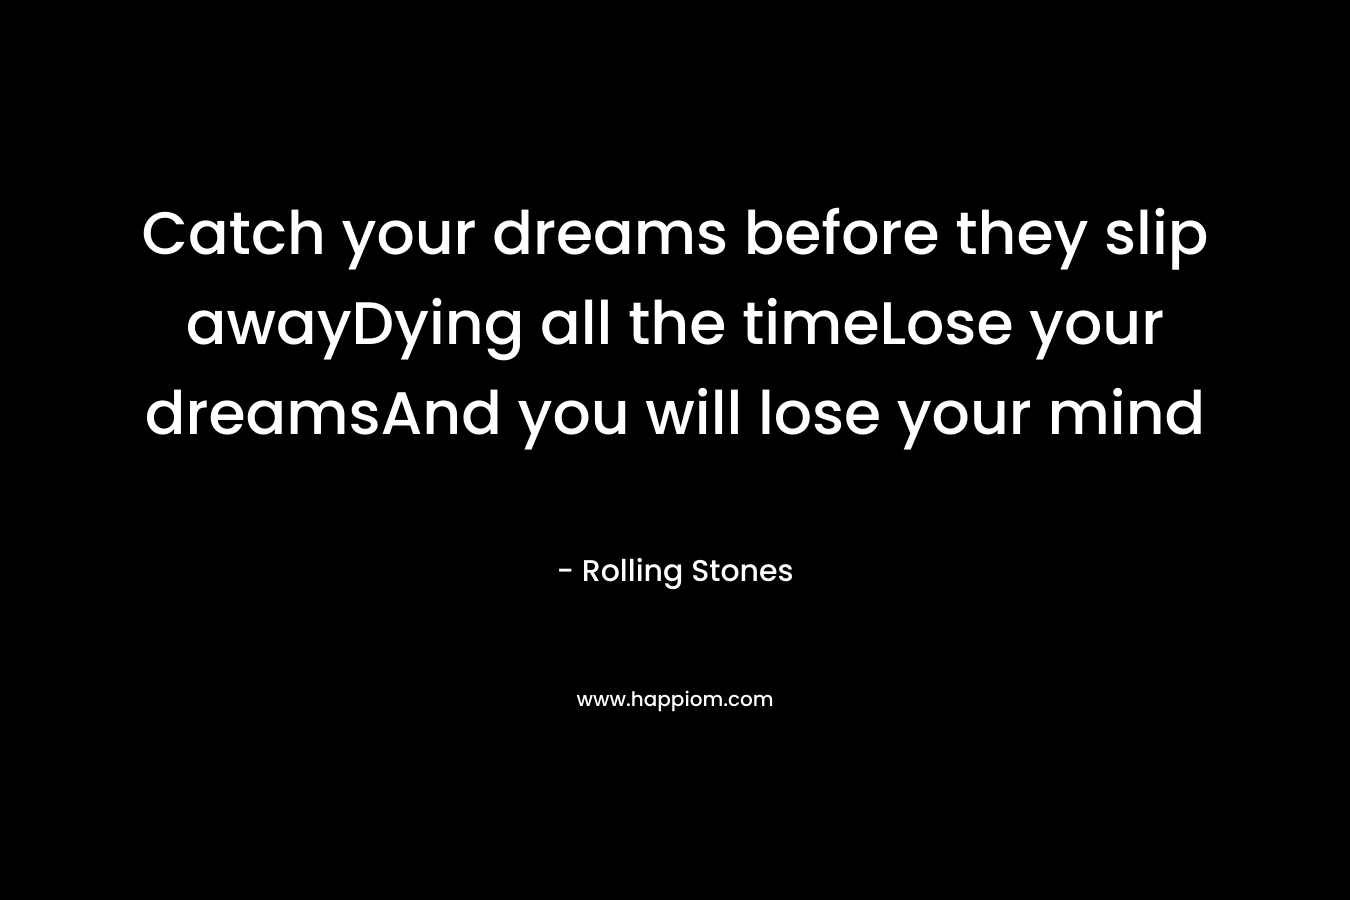 Catch your dreams before they slip awayDying all the timeLose your dreamsAnd you will lose your mind – Rolling Stones